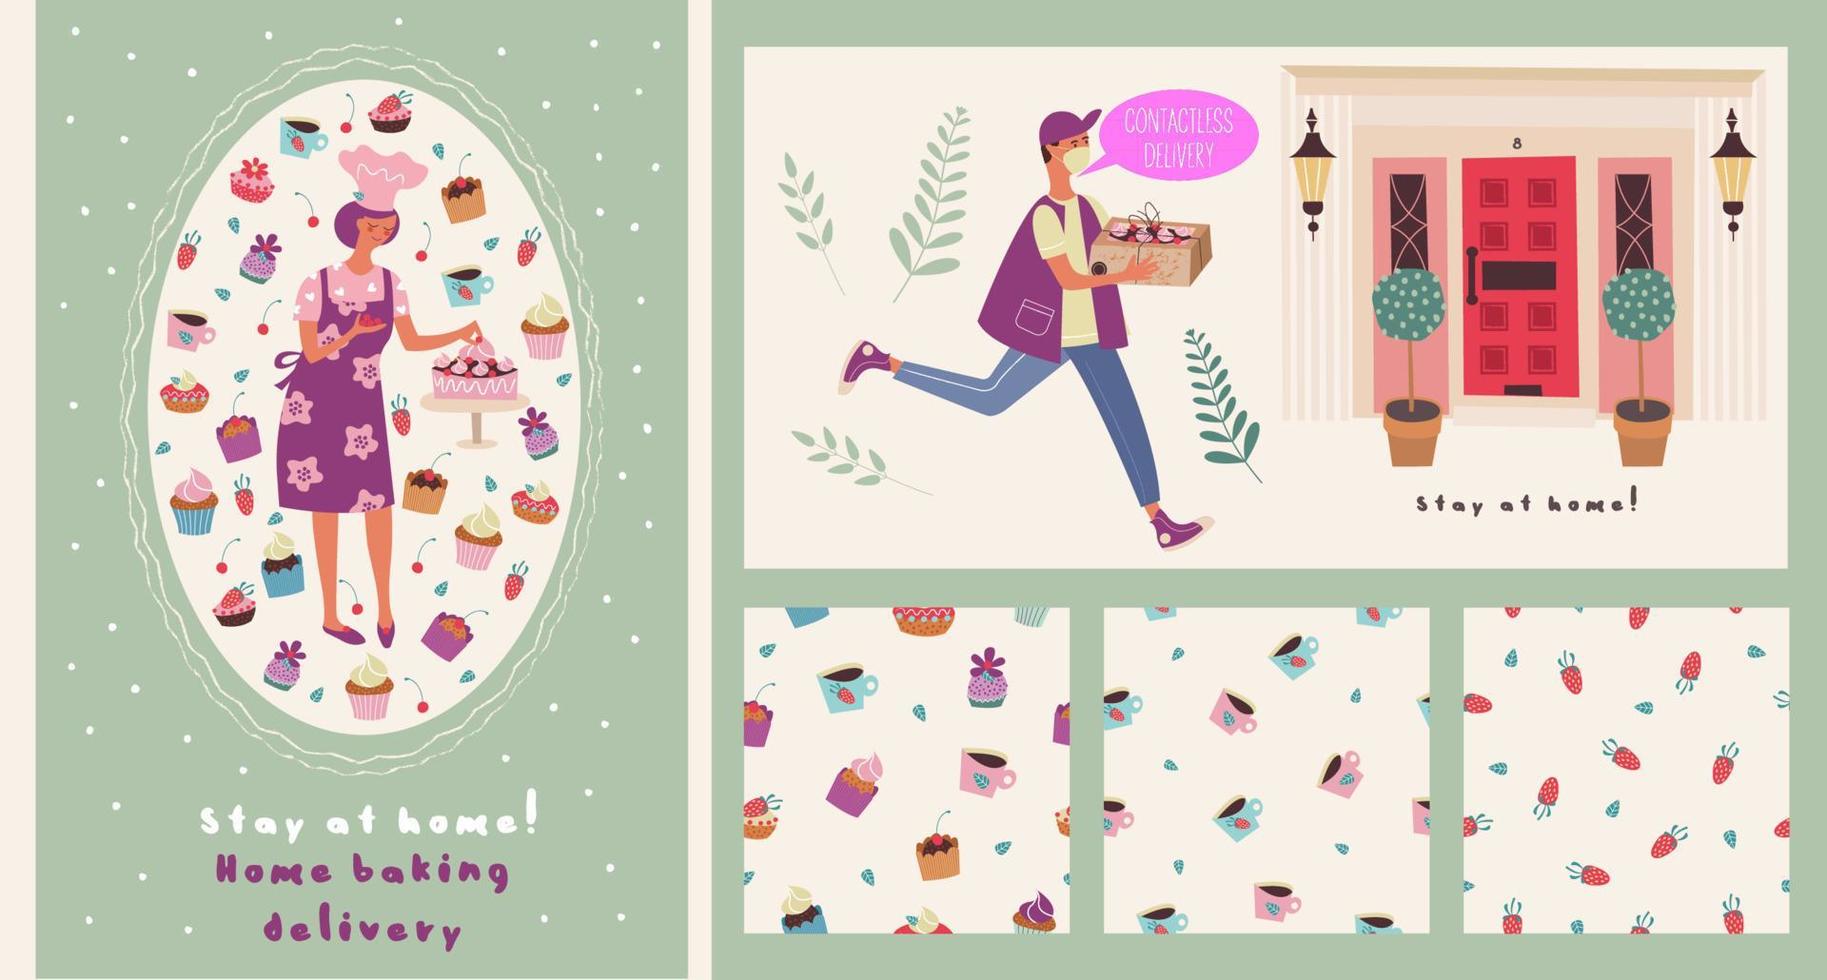 Home bakery. Contactless delivery. Vector illustration. A set of seamless patterns.